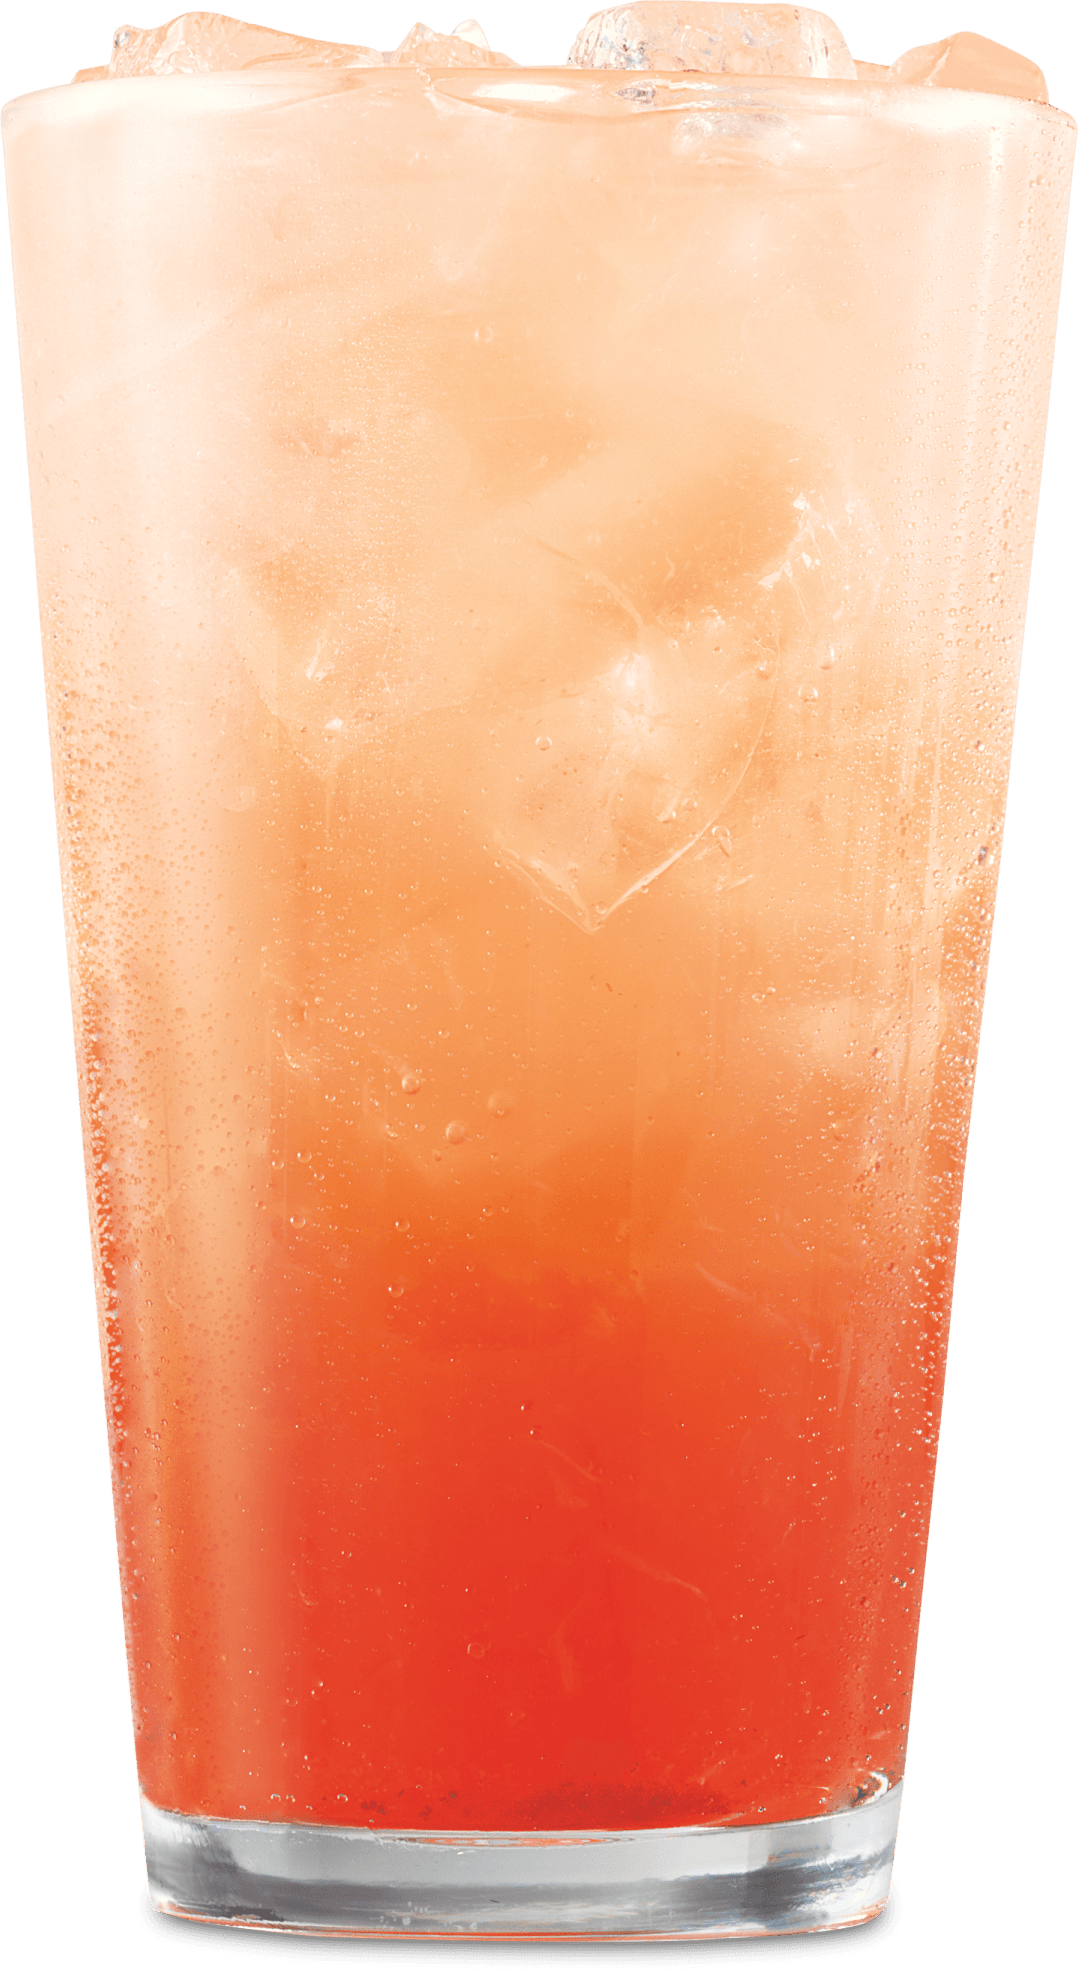 Arby's Small Strawberry Lemonade Nutrition Facts